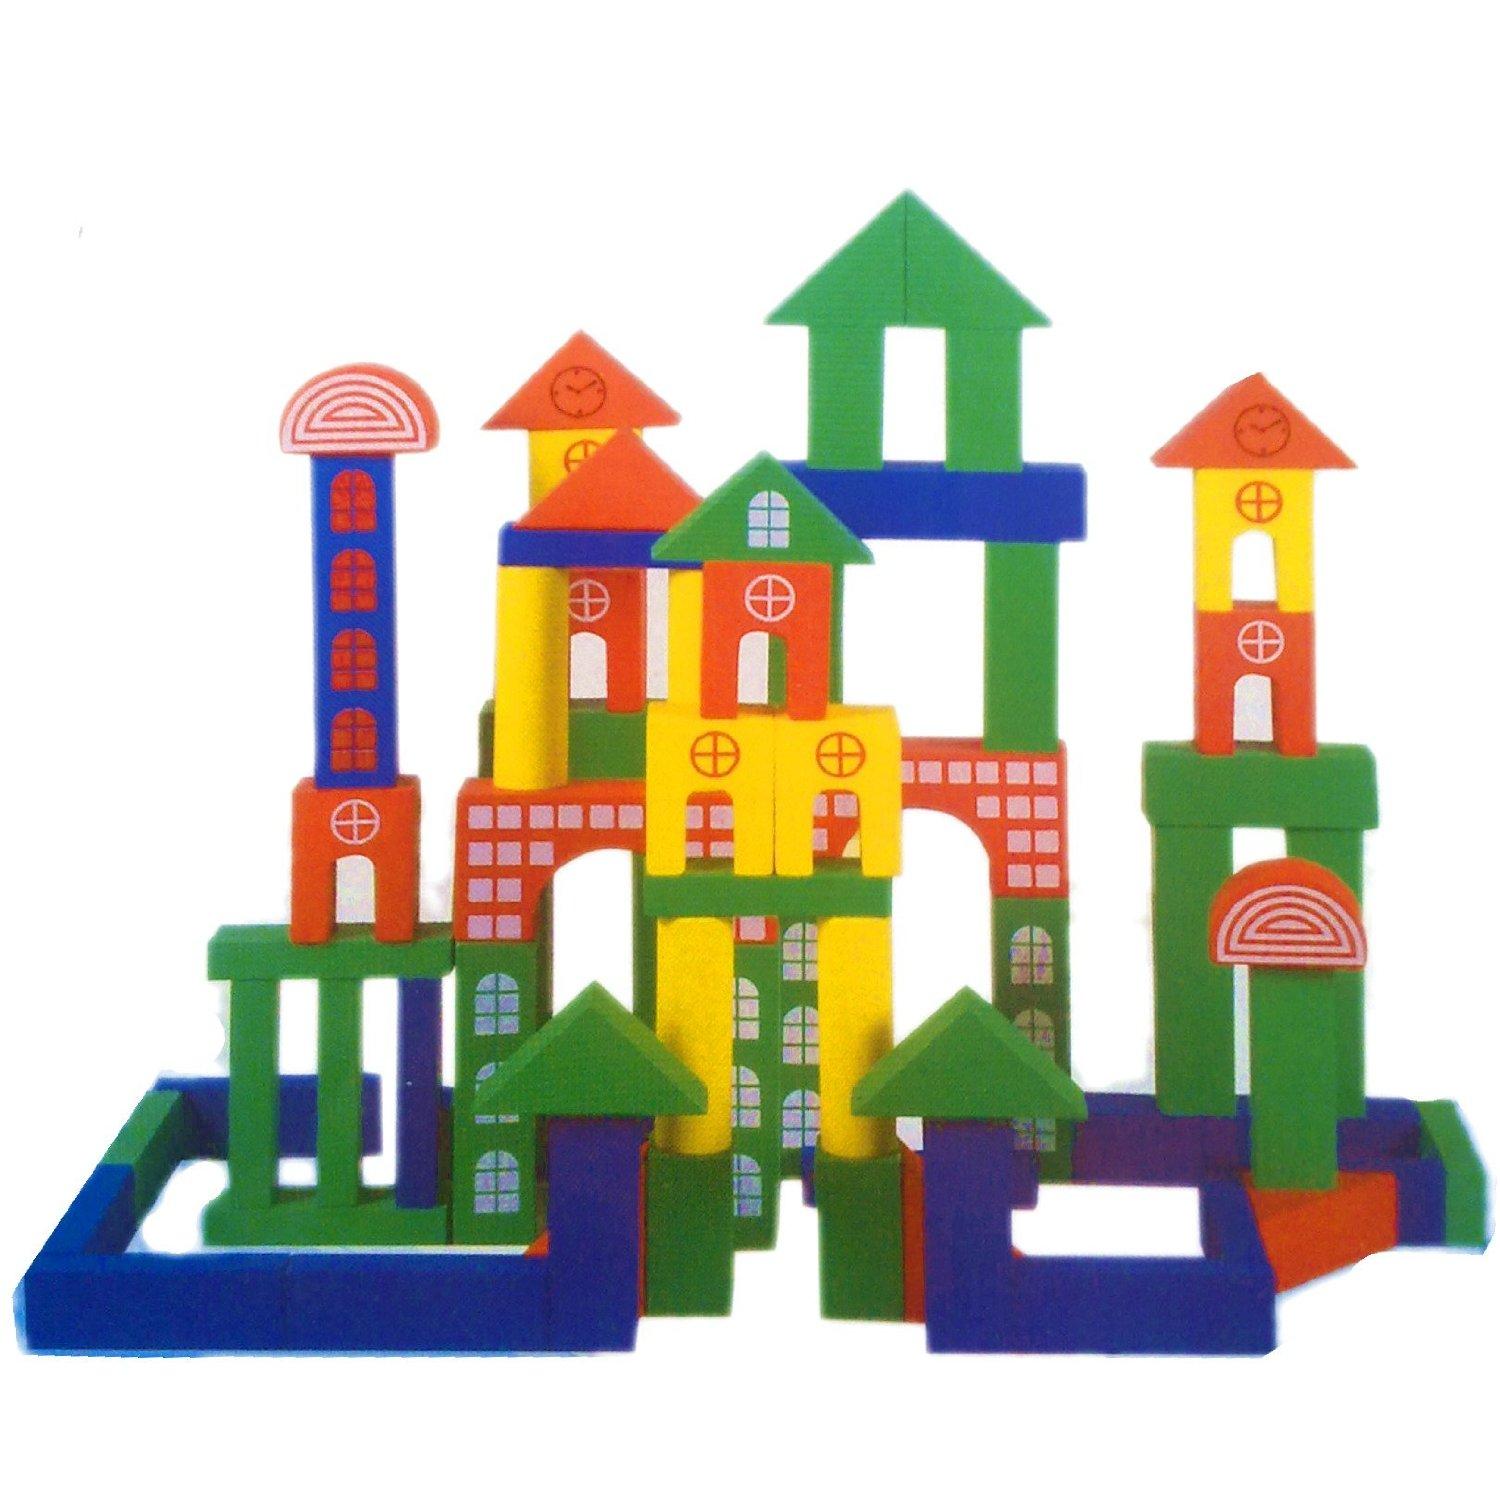 Childrens Blocks Clipart Vector, Cartoon Children Playing With Building ...